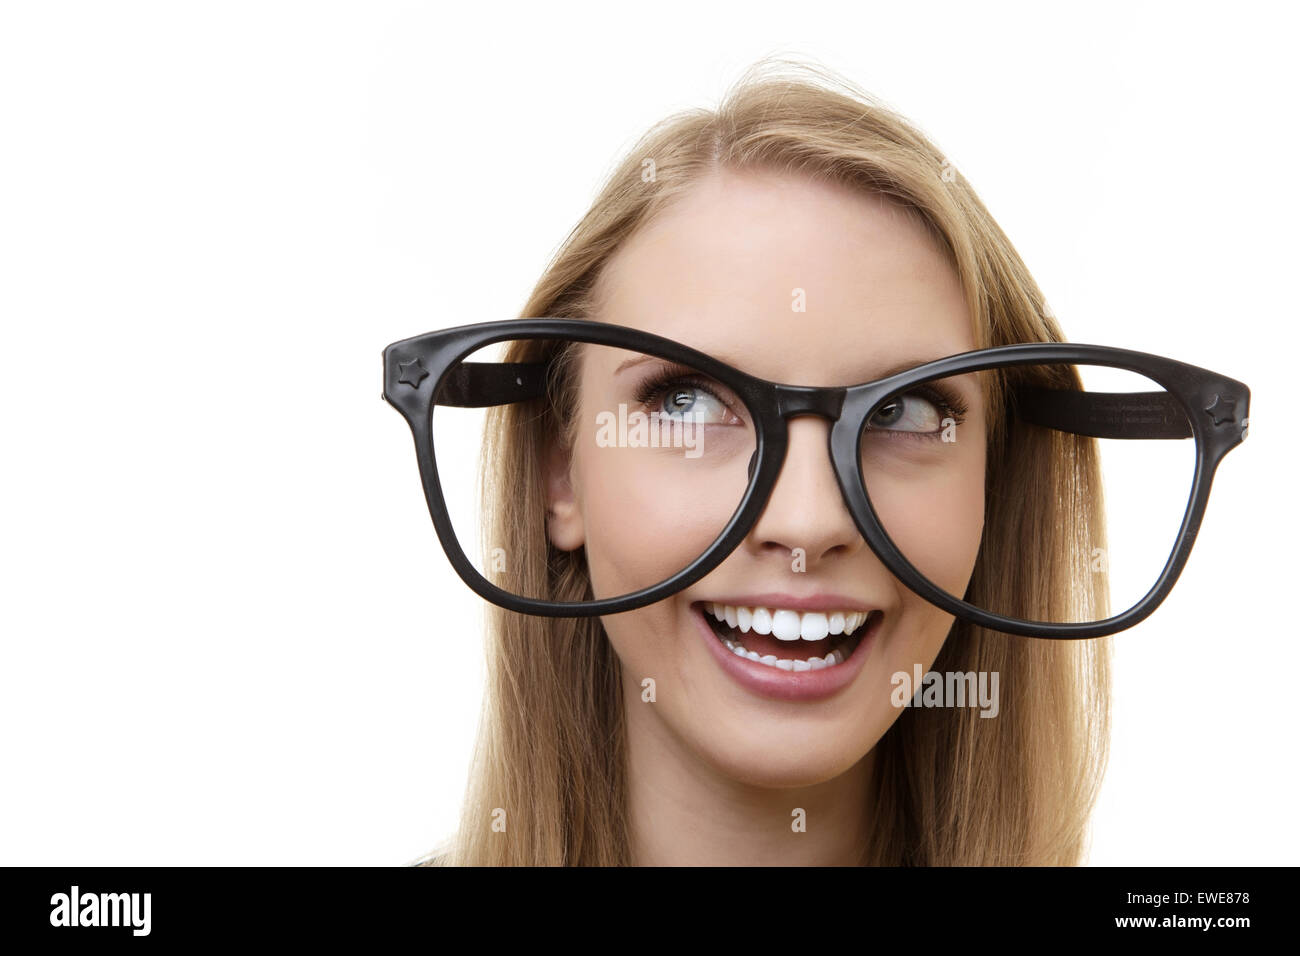 professional looking woman wearing large funny glasses Stock Photo